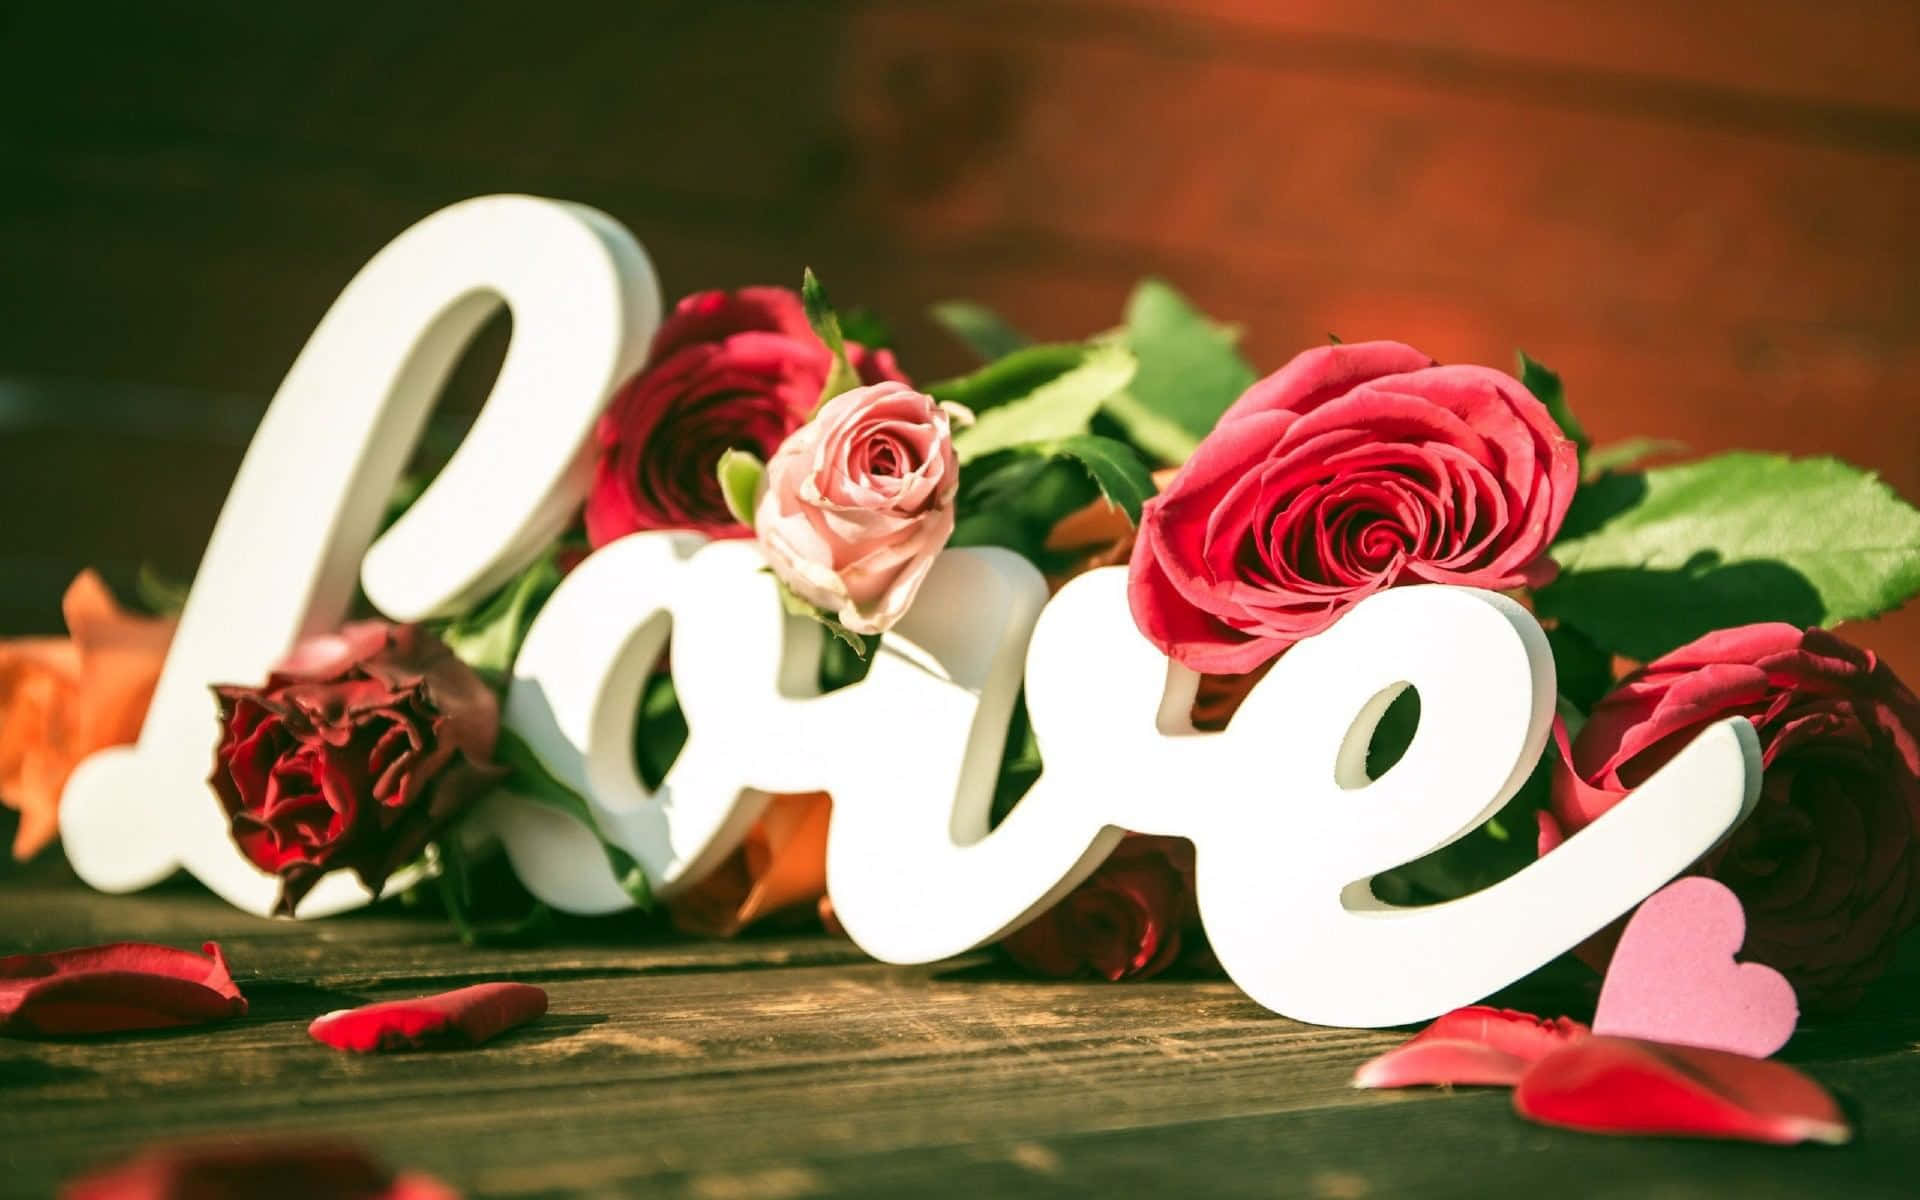 Love Flowers Sign Picture